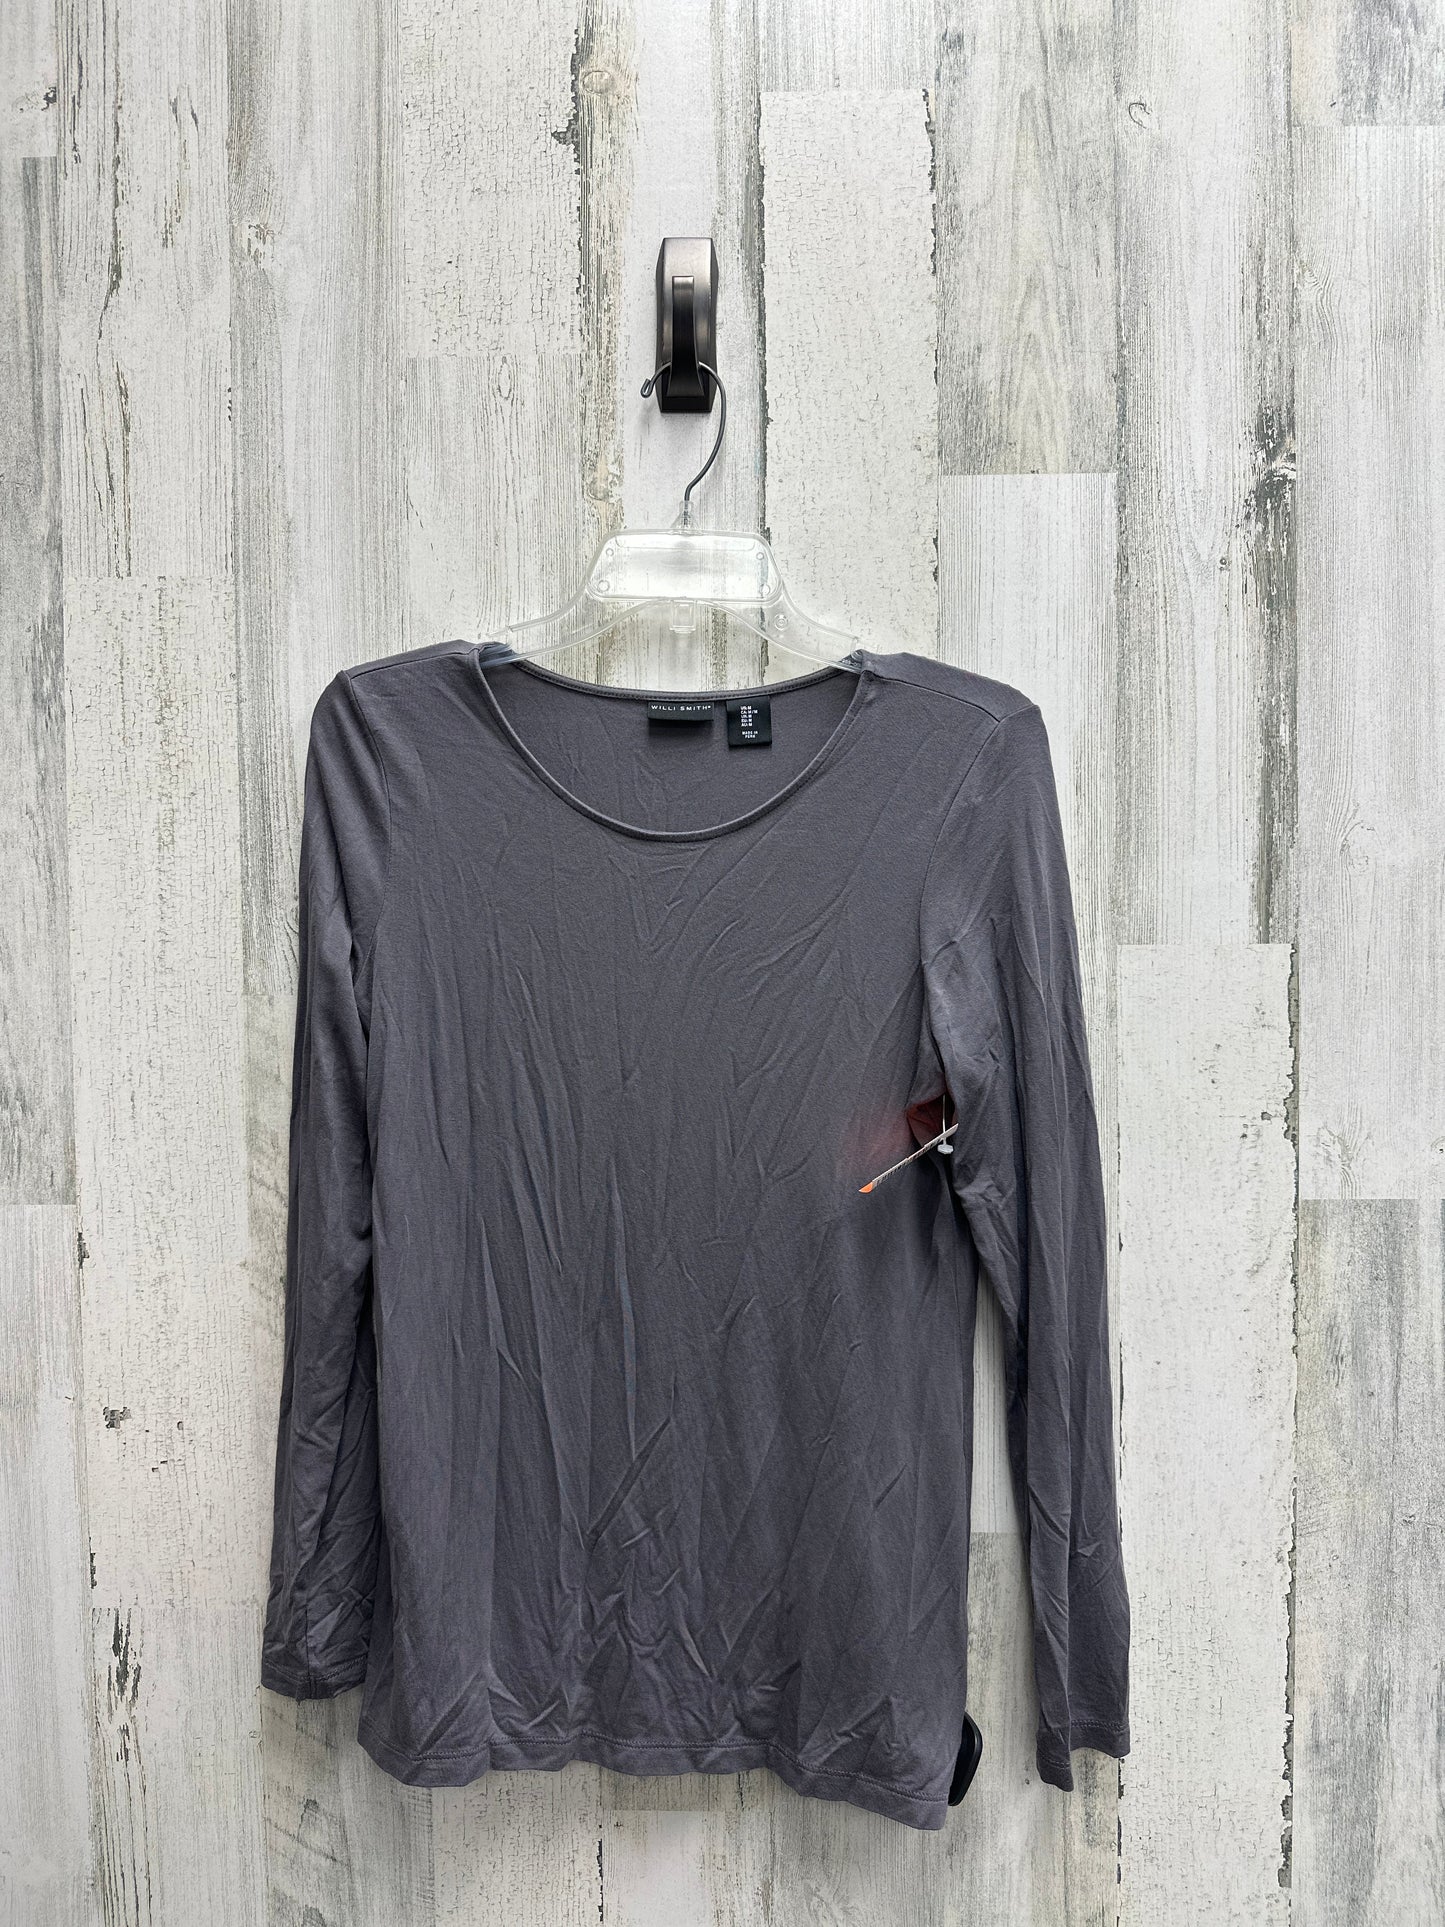 Top Long Sleeve By Willi Smith  Size: M